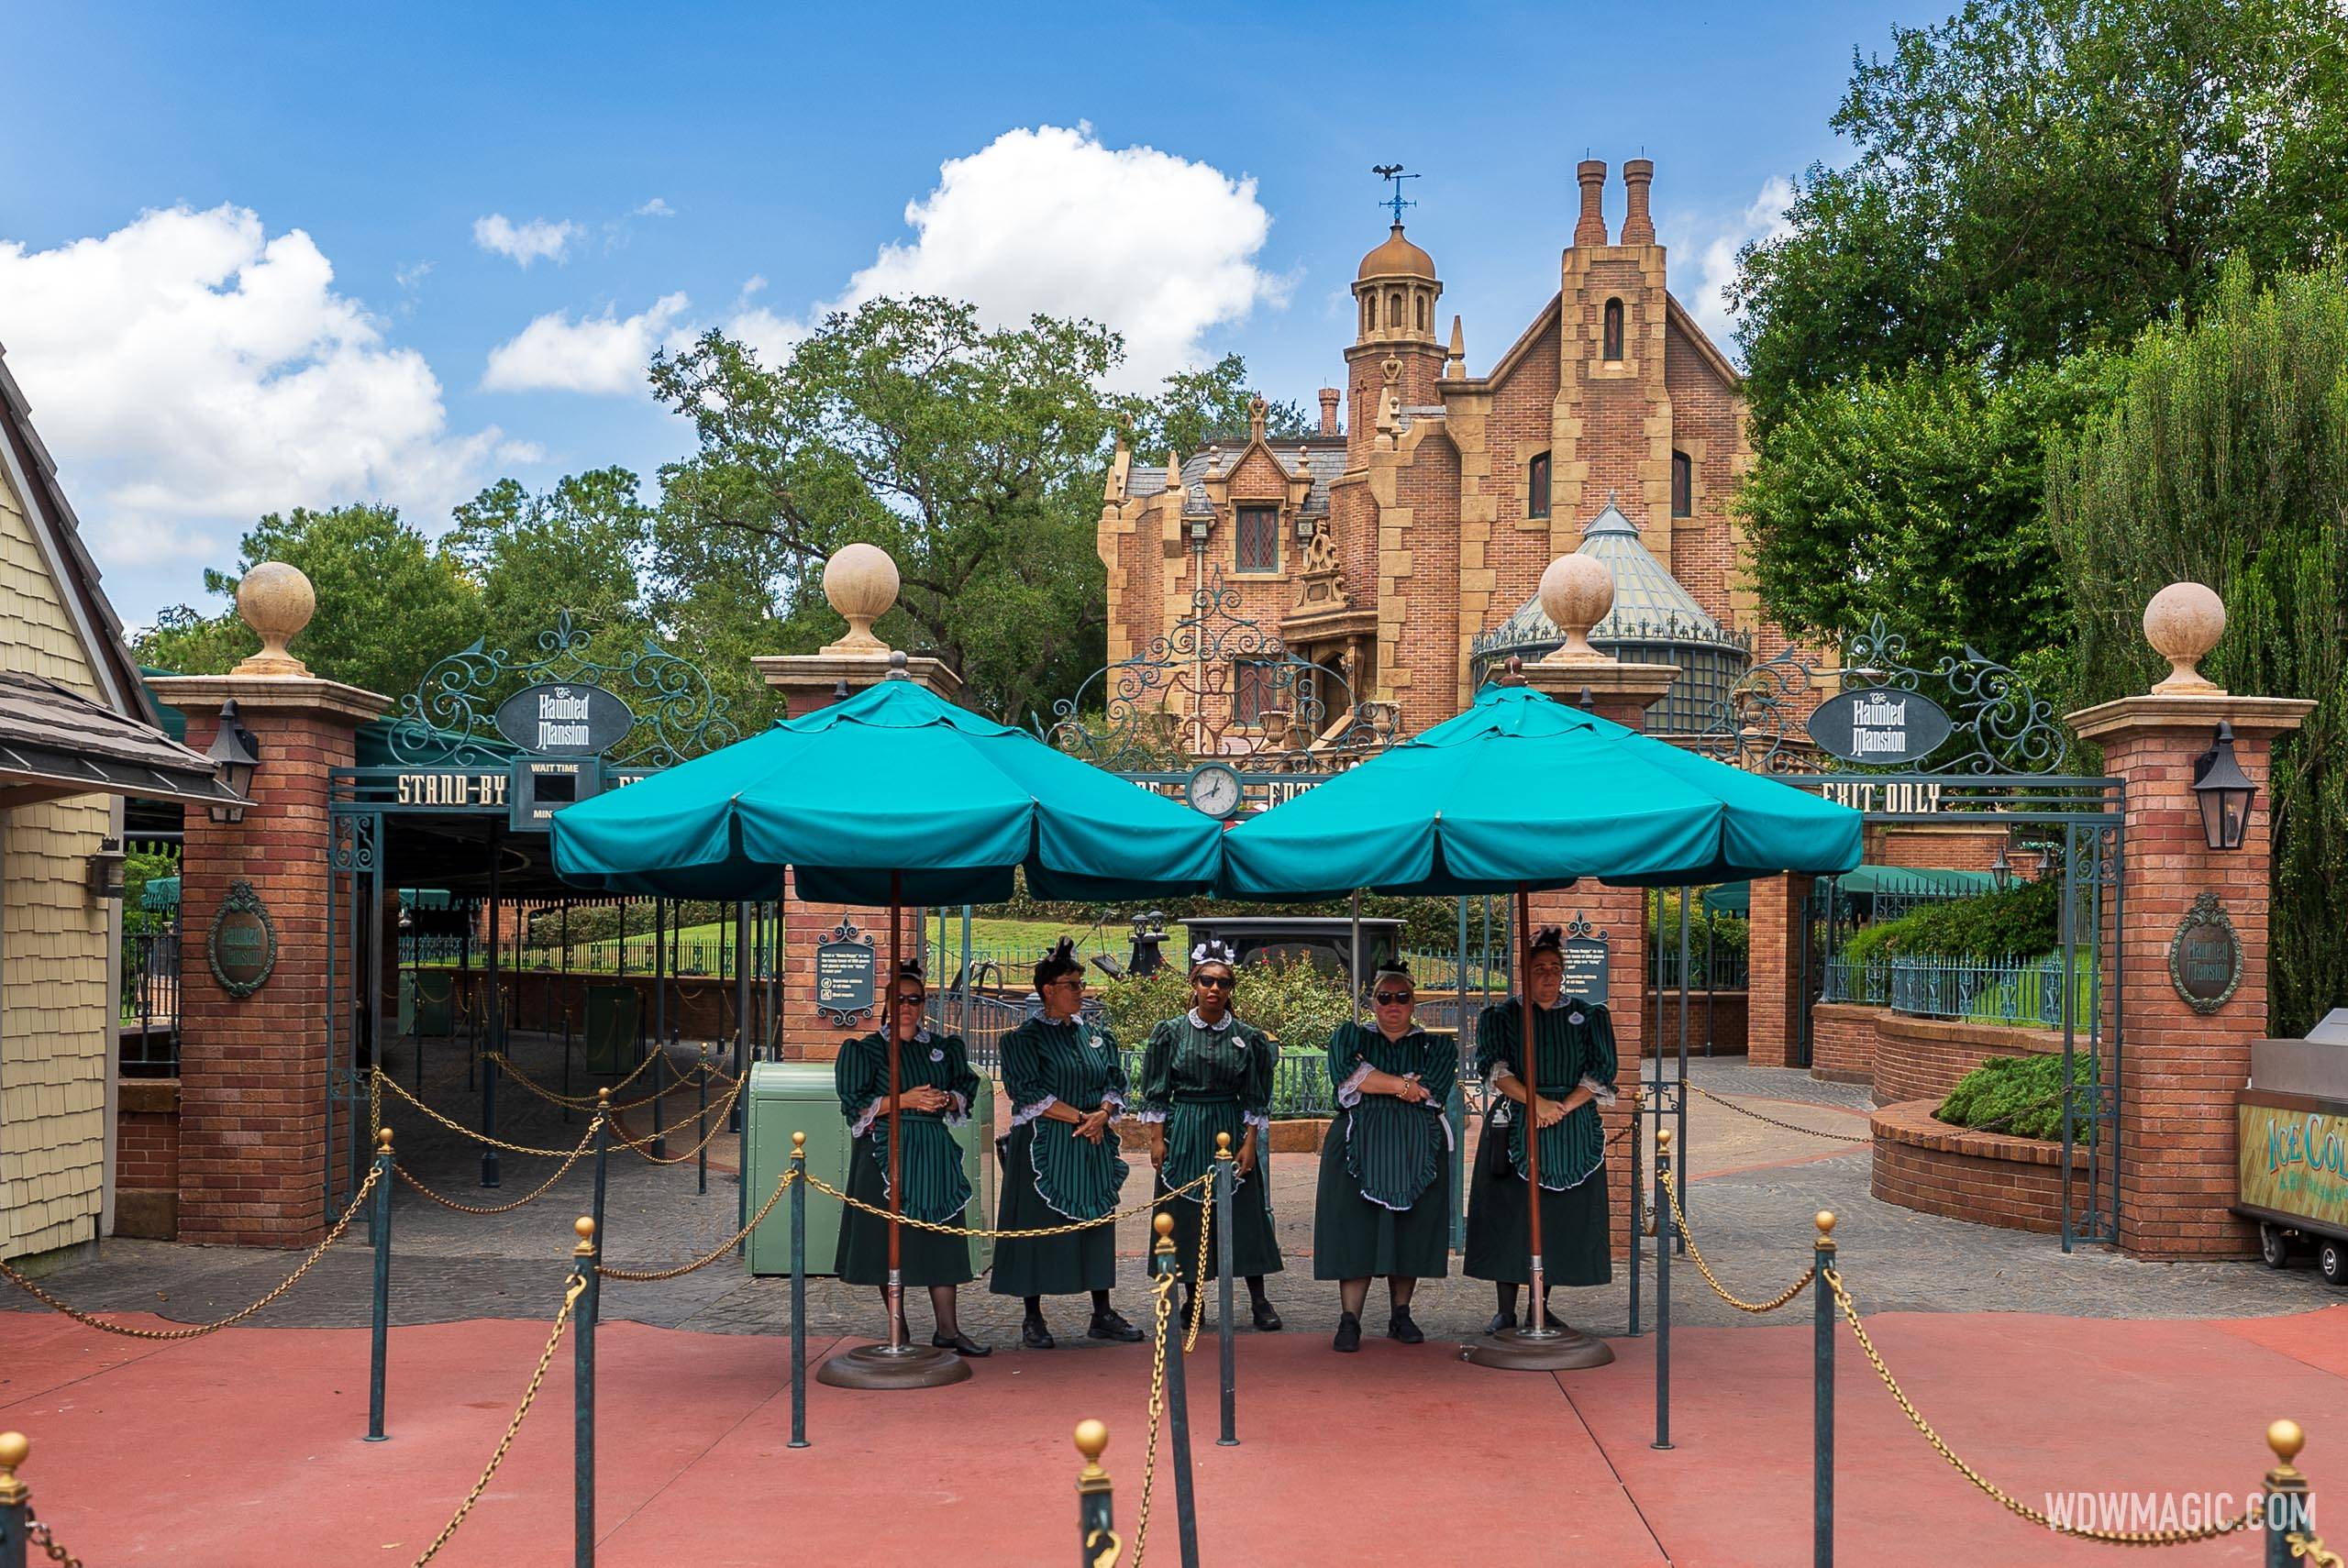 Reopening from refurbishment delayed at the Haunted Mansion